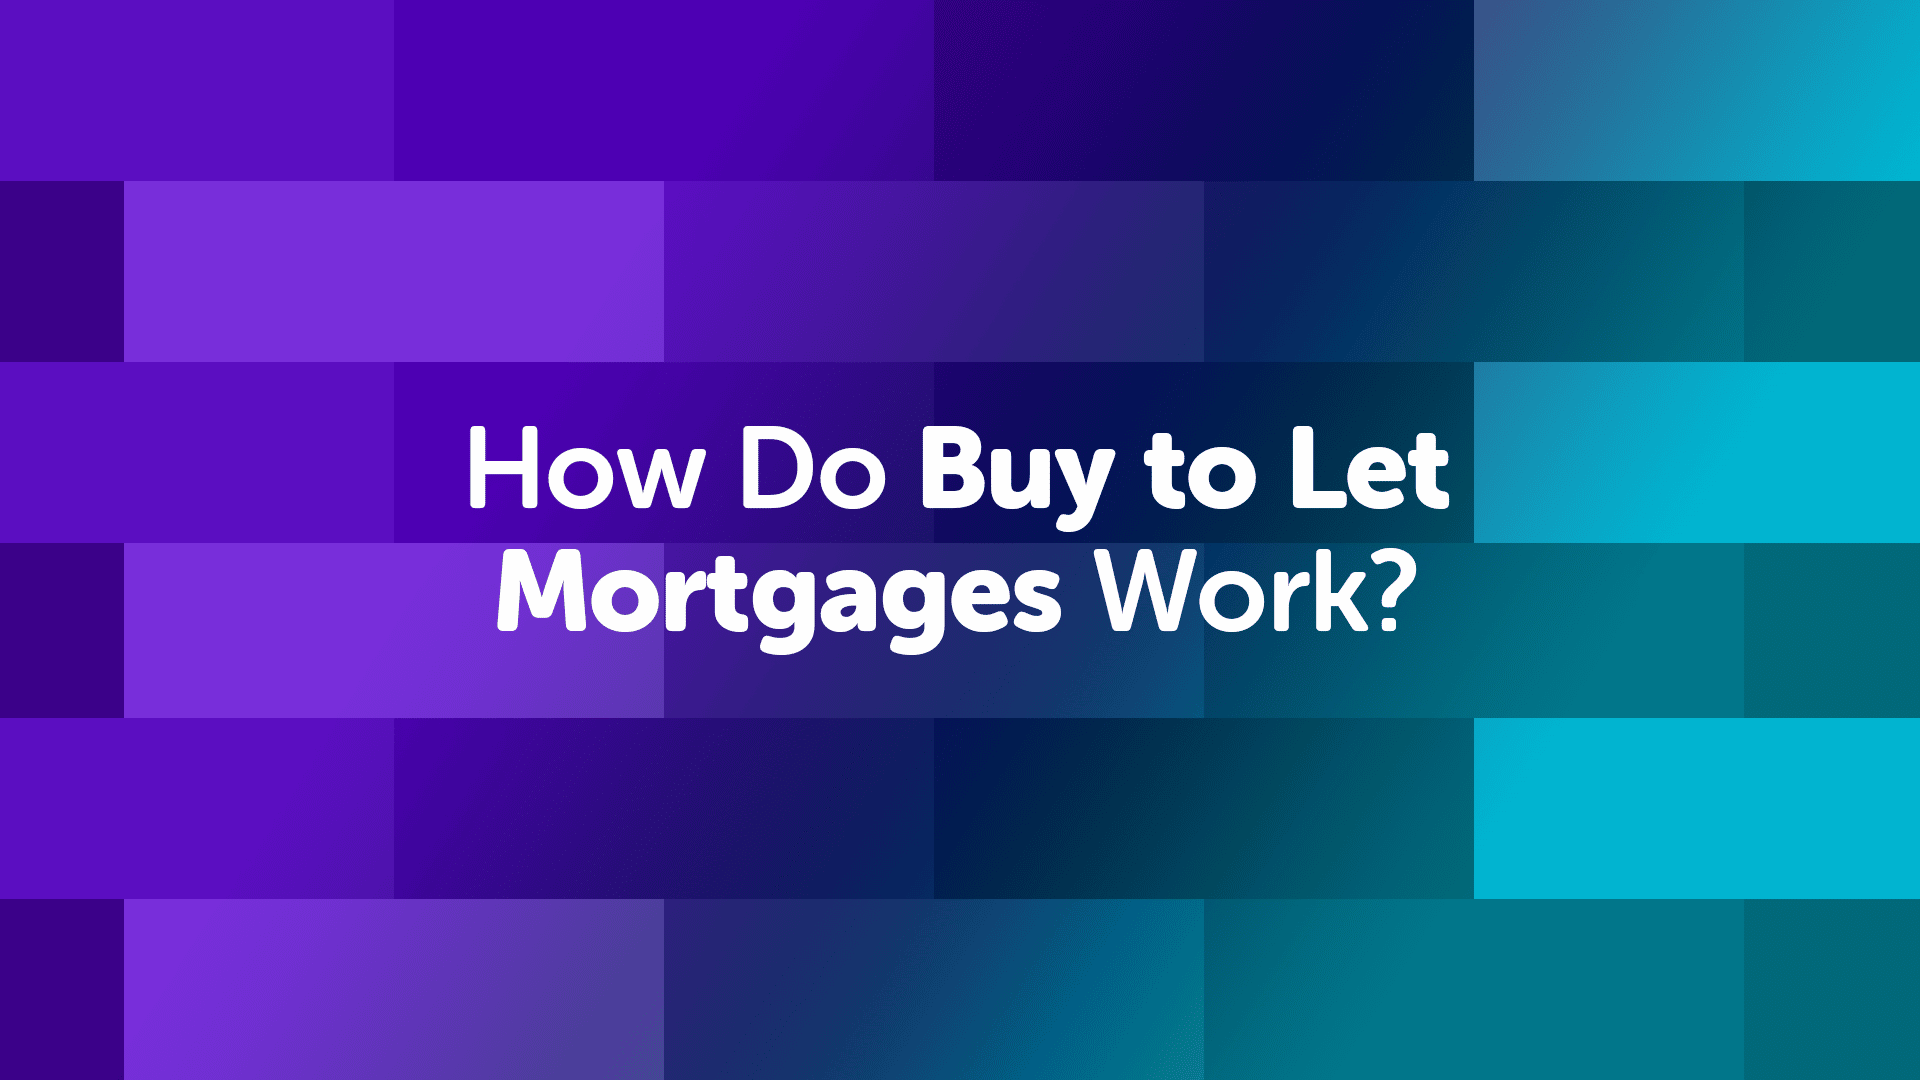 How Do Buy to Let Mortgages Work? | UK Moneyman | Mortgage Broker | Mortgage Advice | Mortgage Advisor | Buy to Let